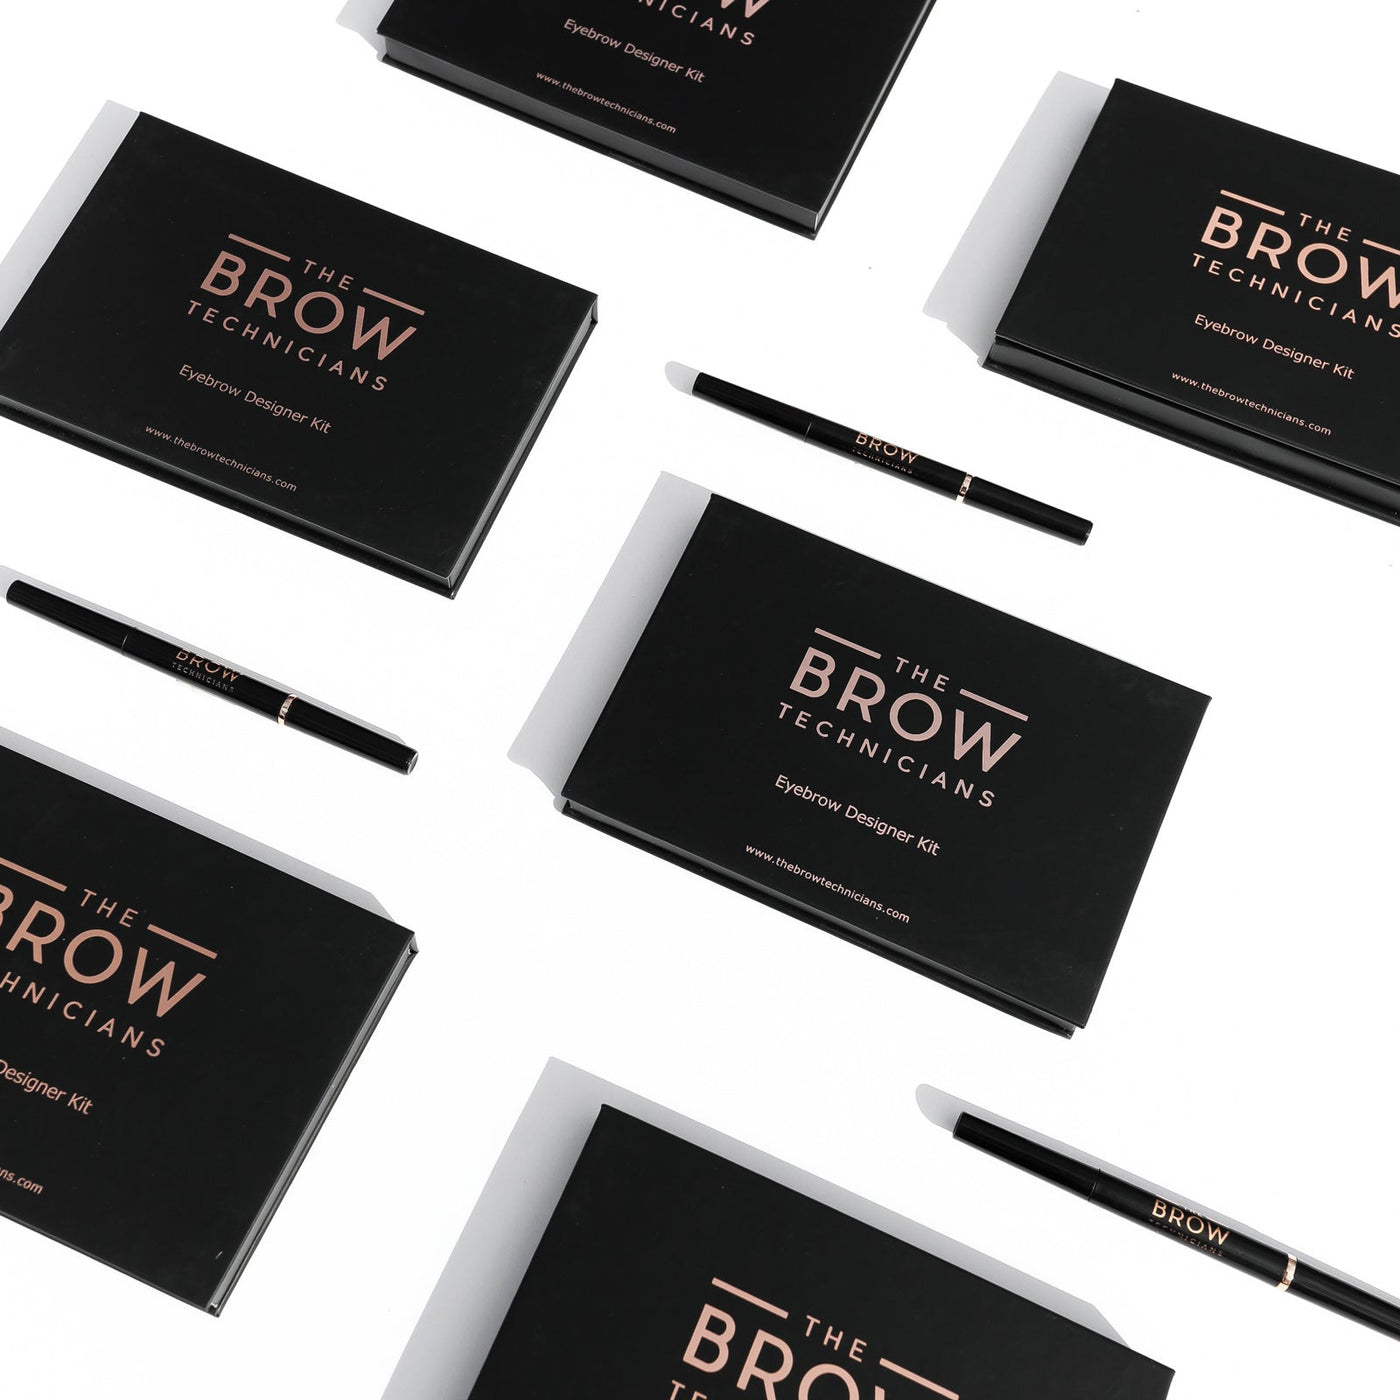 The Brow Technicians All-In-One Eyebrow Designer Kit styled